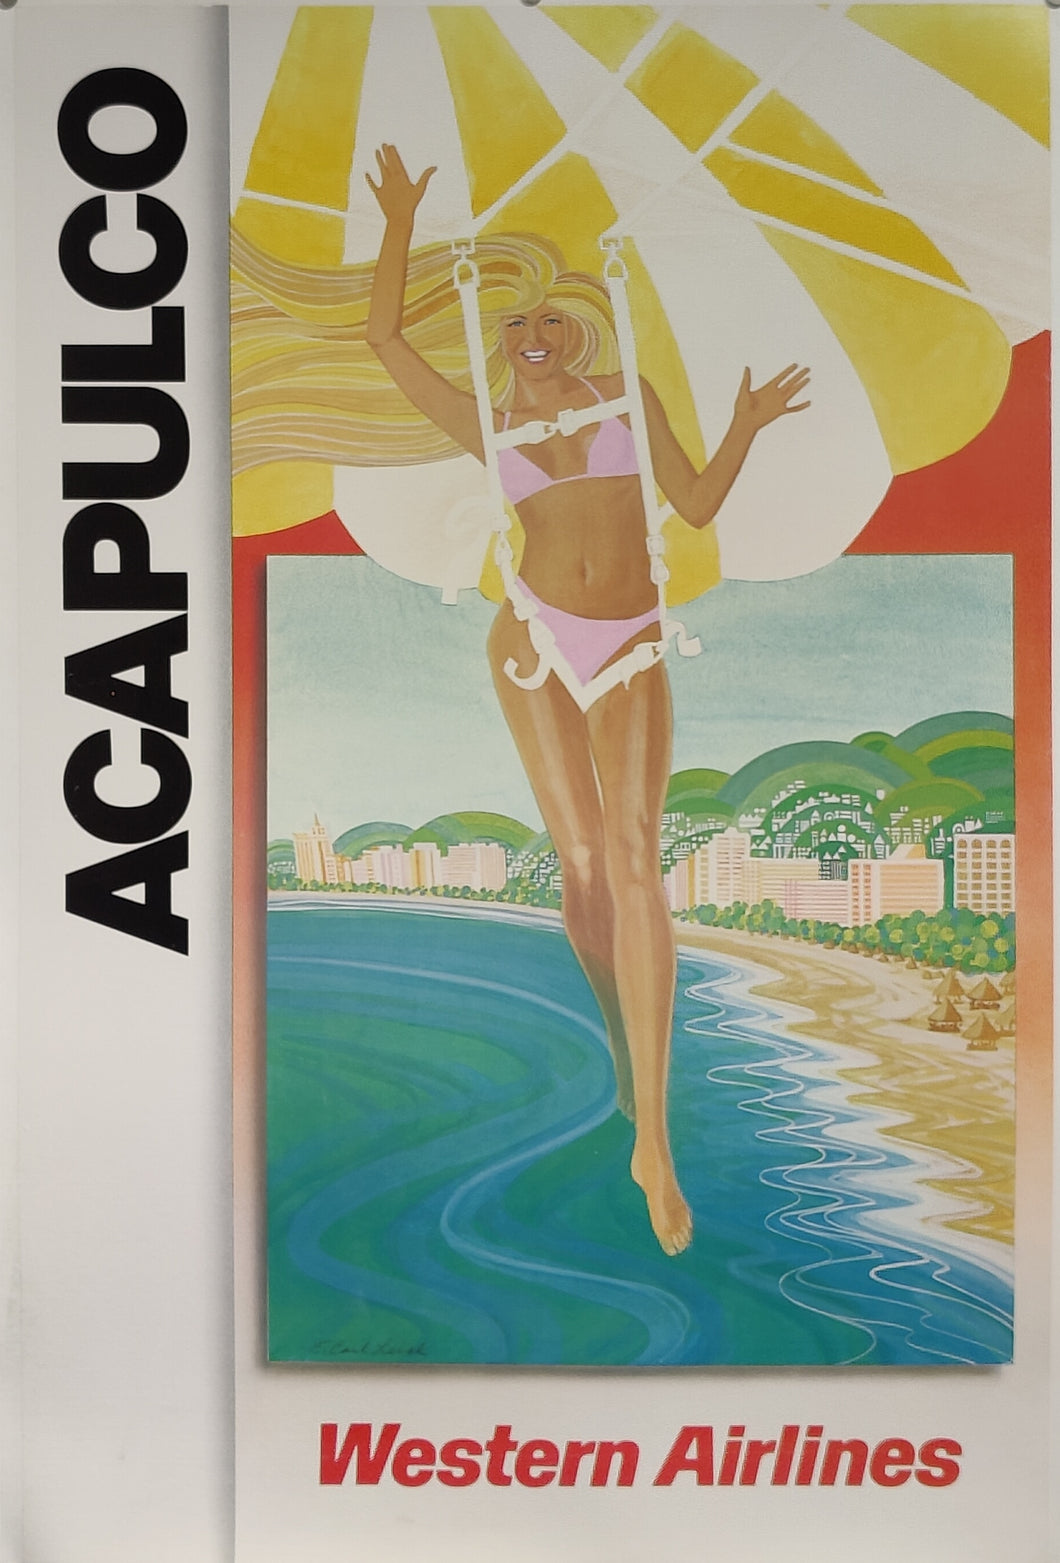 Acapulco - Western Airlines